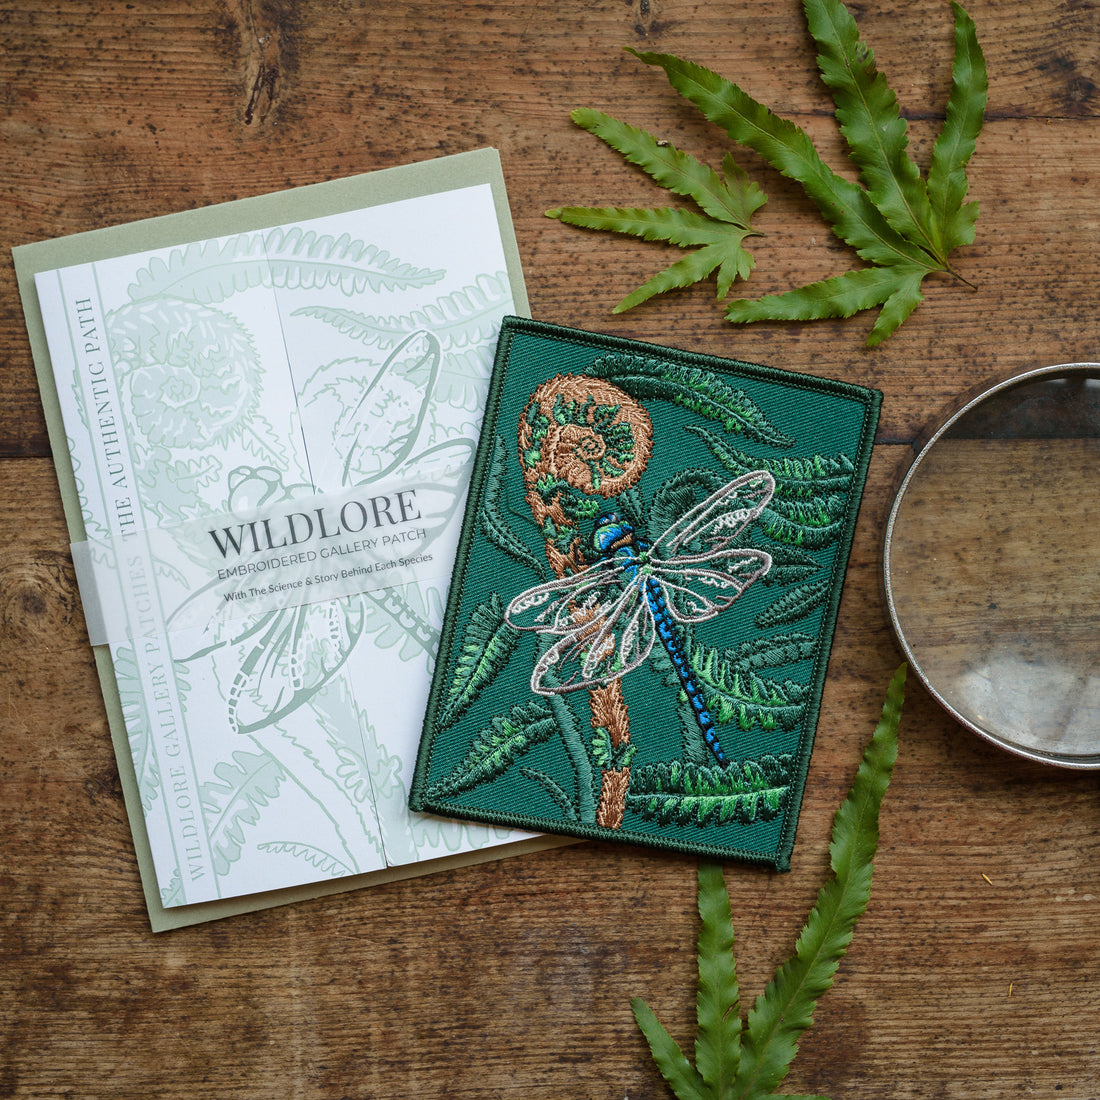 Dragonfly and Fern Embroidered Patch in gatefold card with science and story behind the species